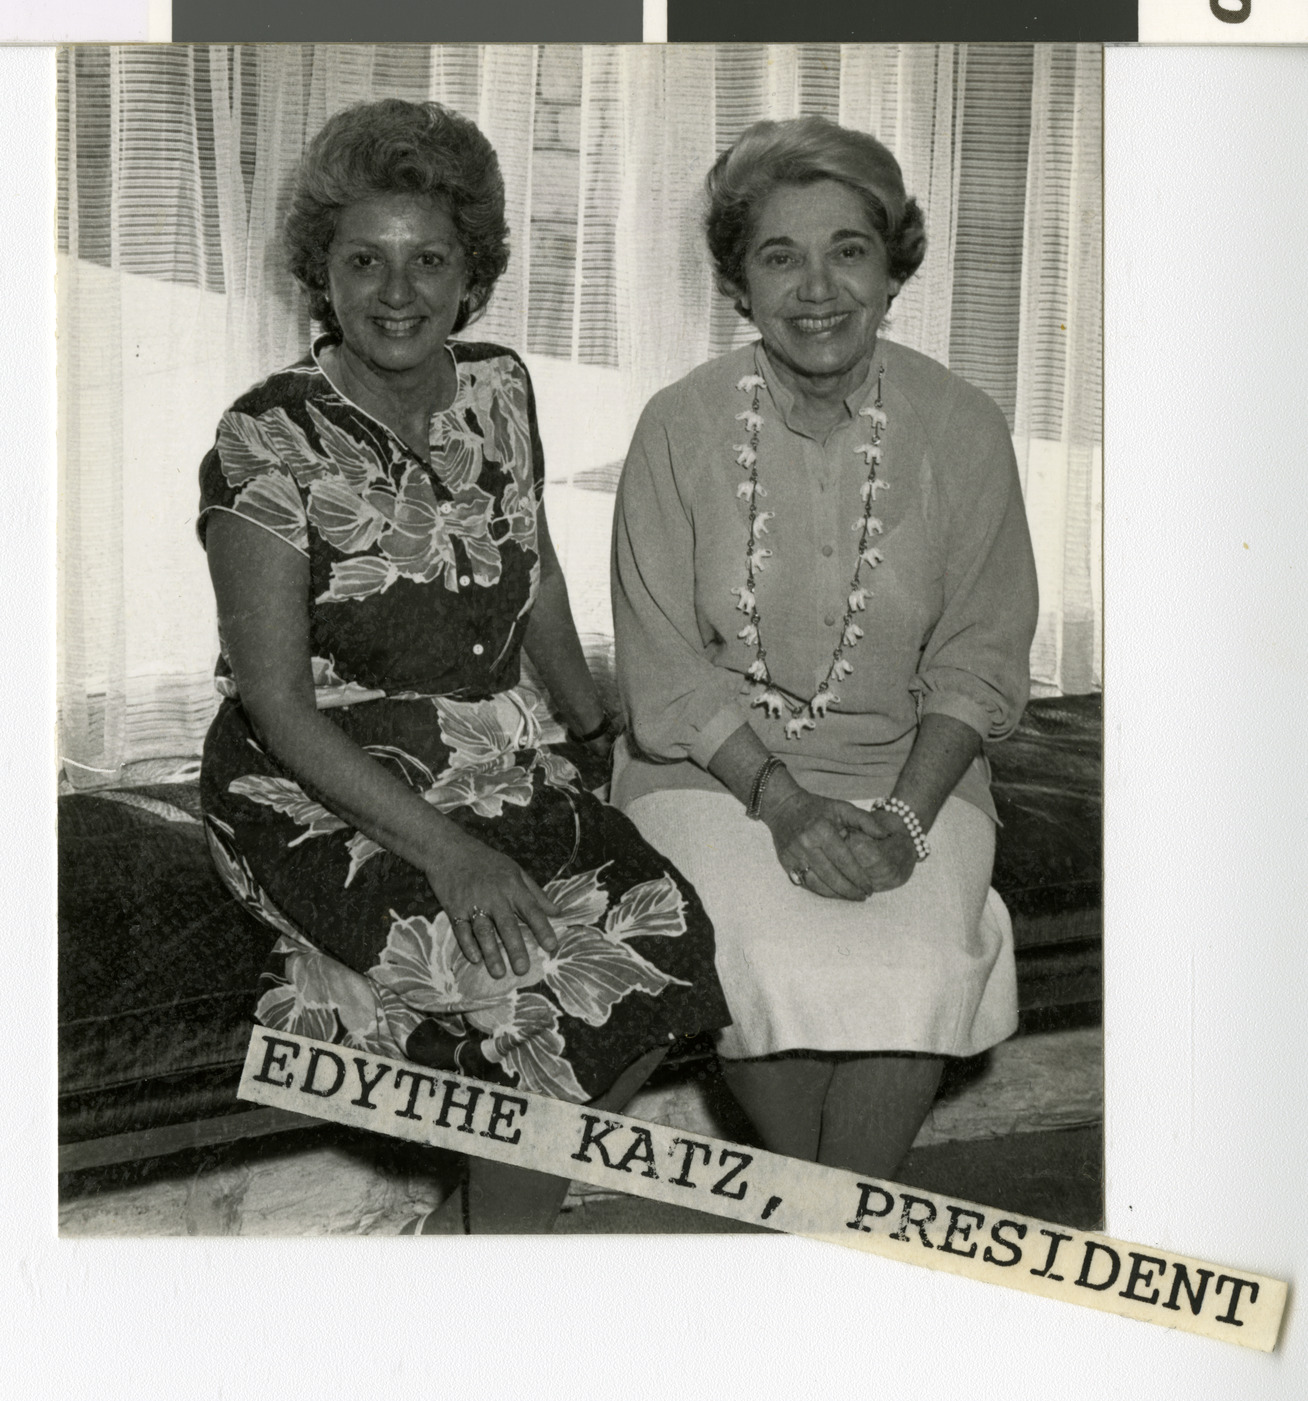 Photographs of Jewish Federation Women's Division Leaders, image 15